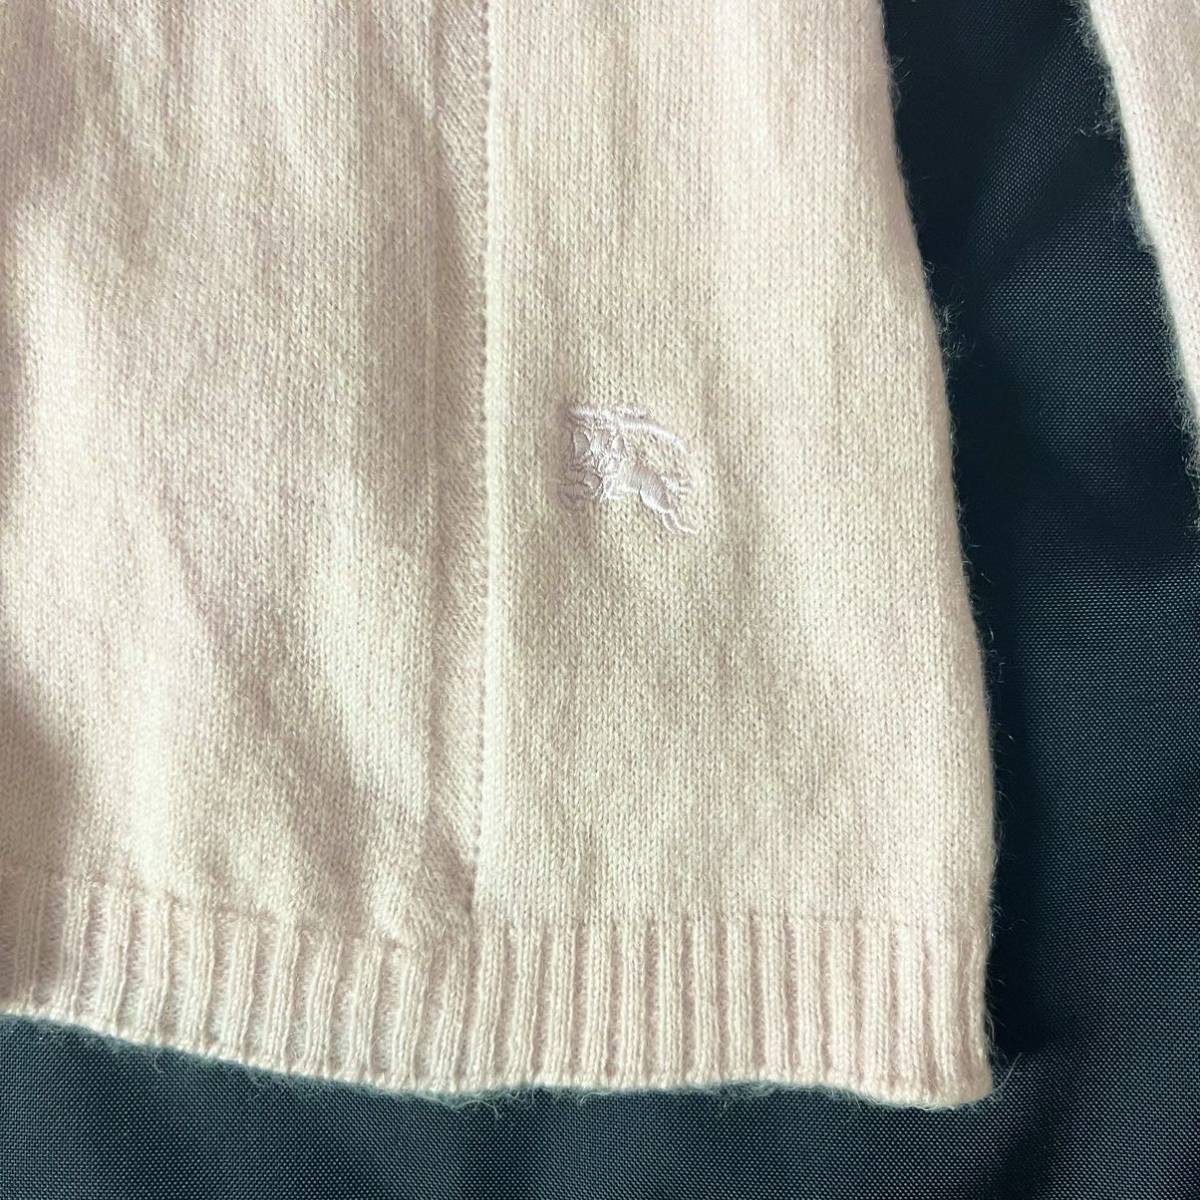 BURBERRY LONDON Burberry London cashmere 100% knitted cardigan hose Logo one Point embroidery brand Logo button pink M